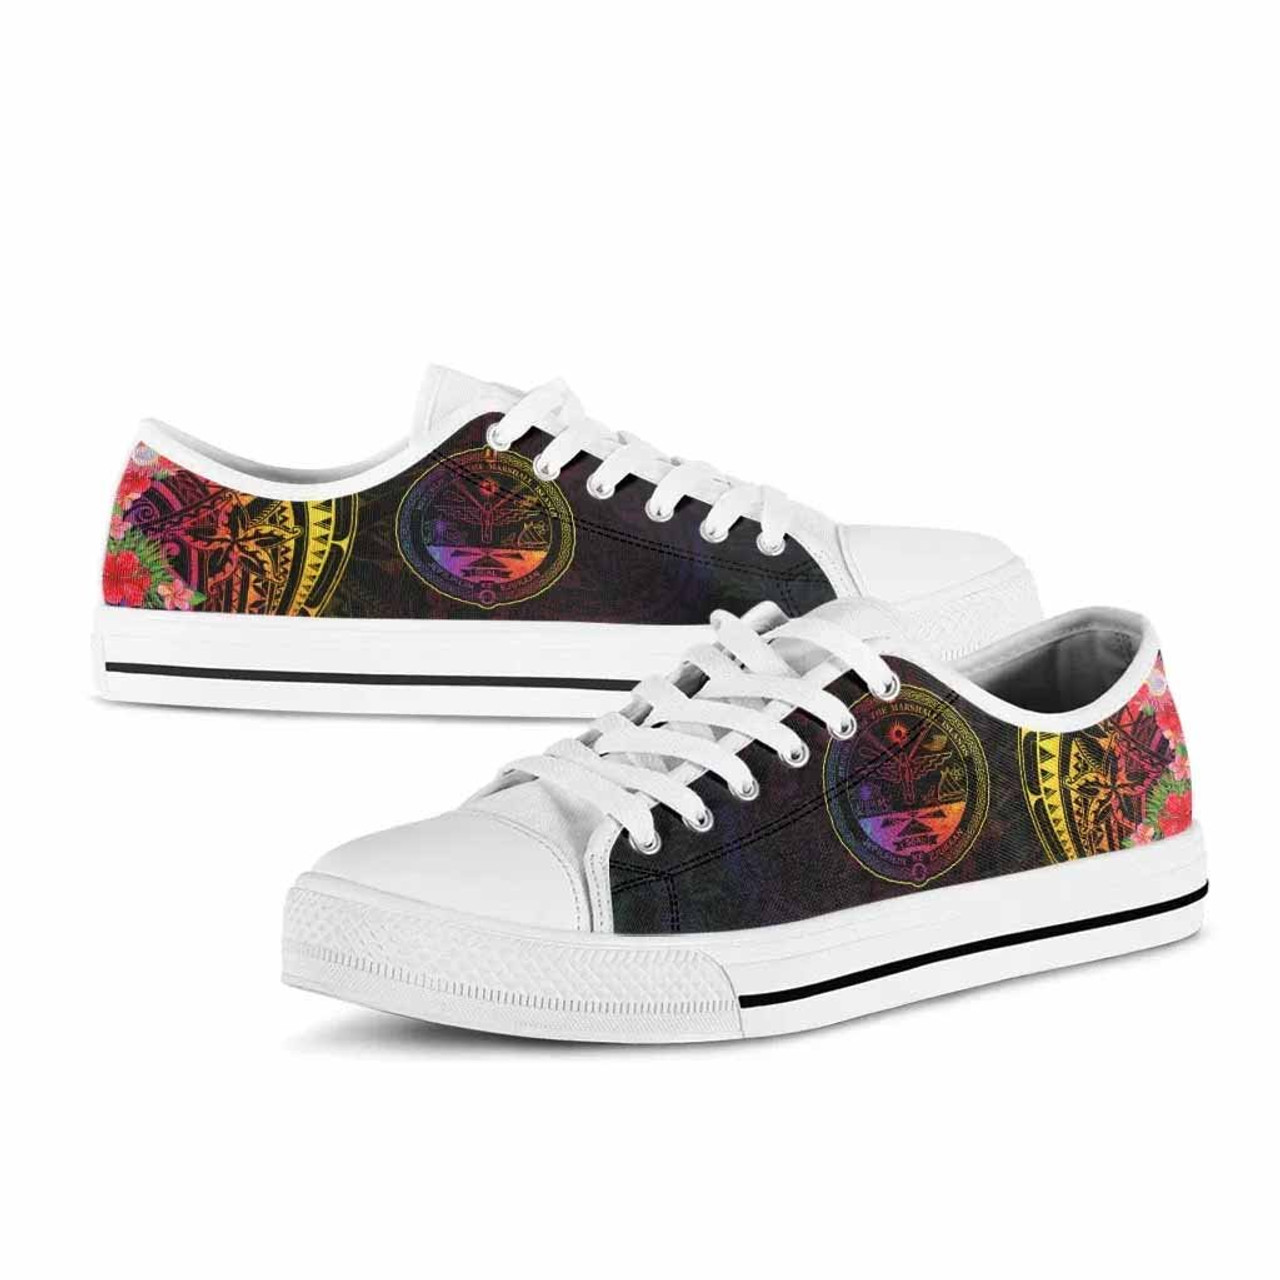 Marshall Islands Low Top Shoes - Tropical Hippie Style 6